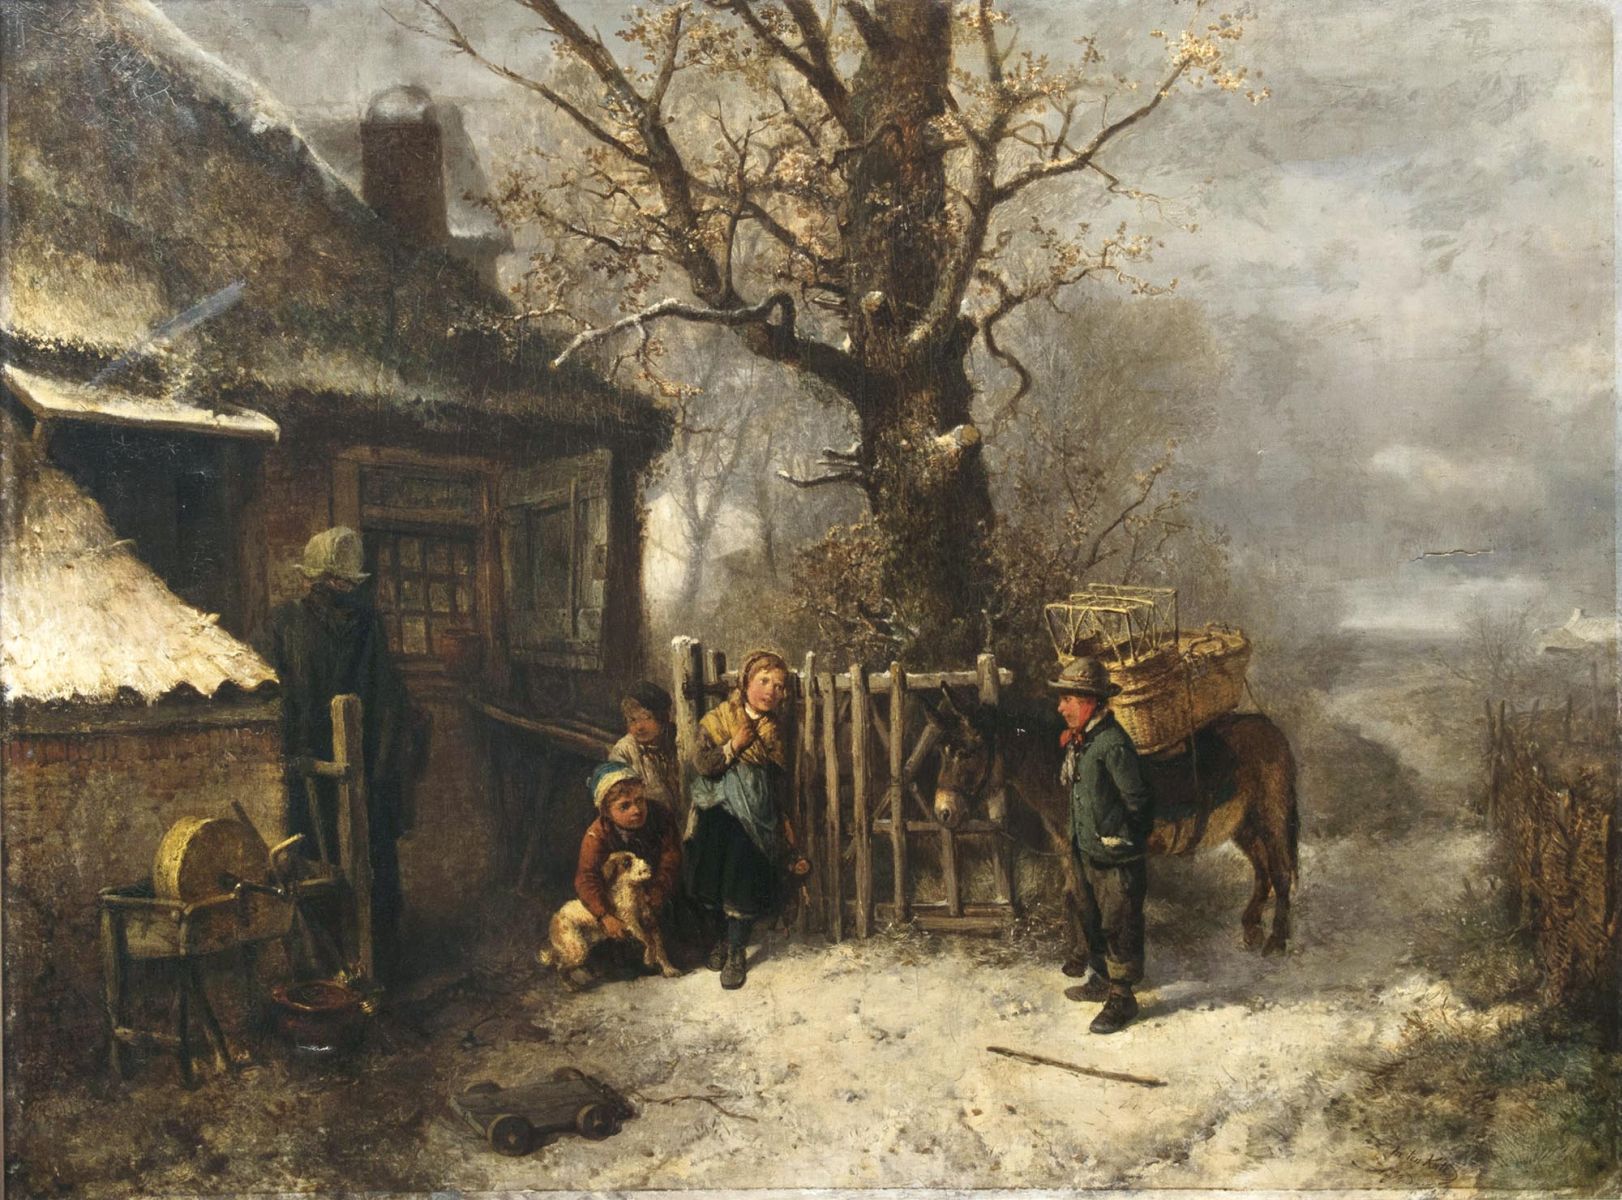 Winter, Children by the Gate